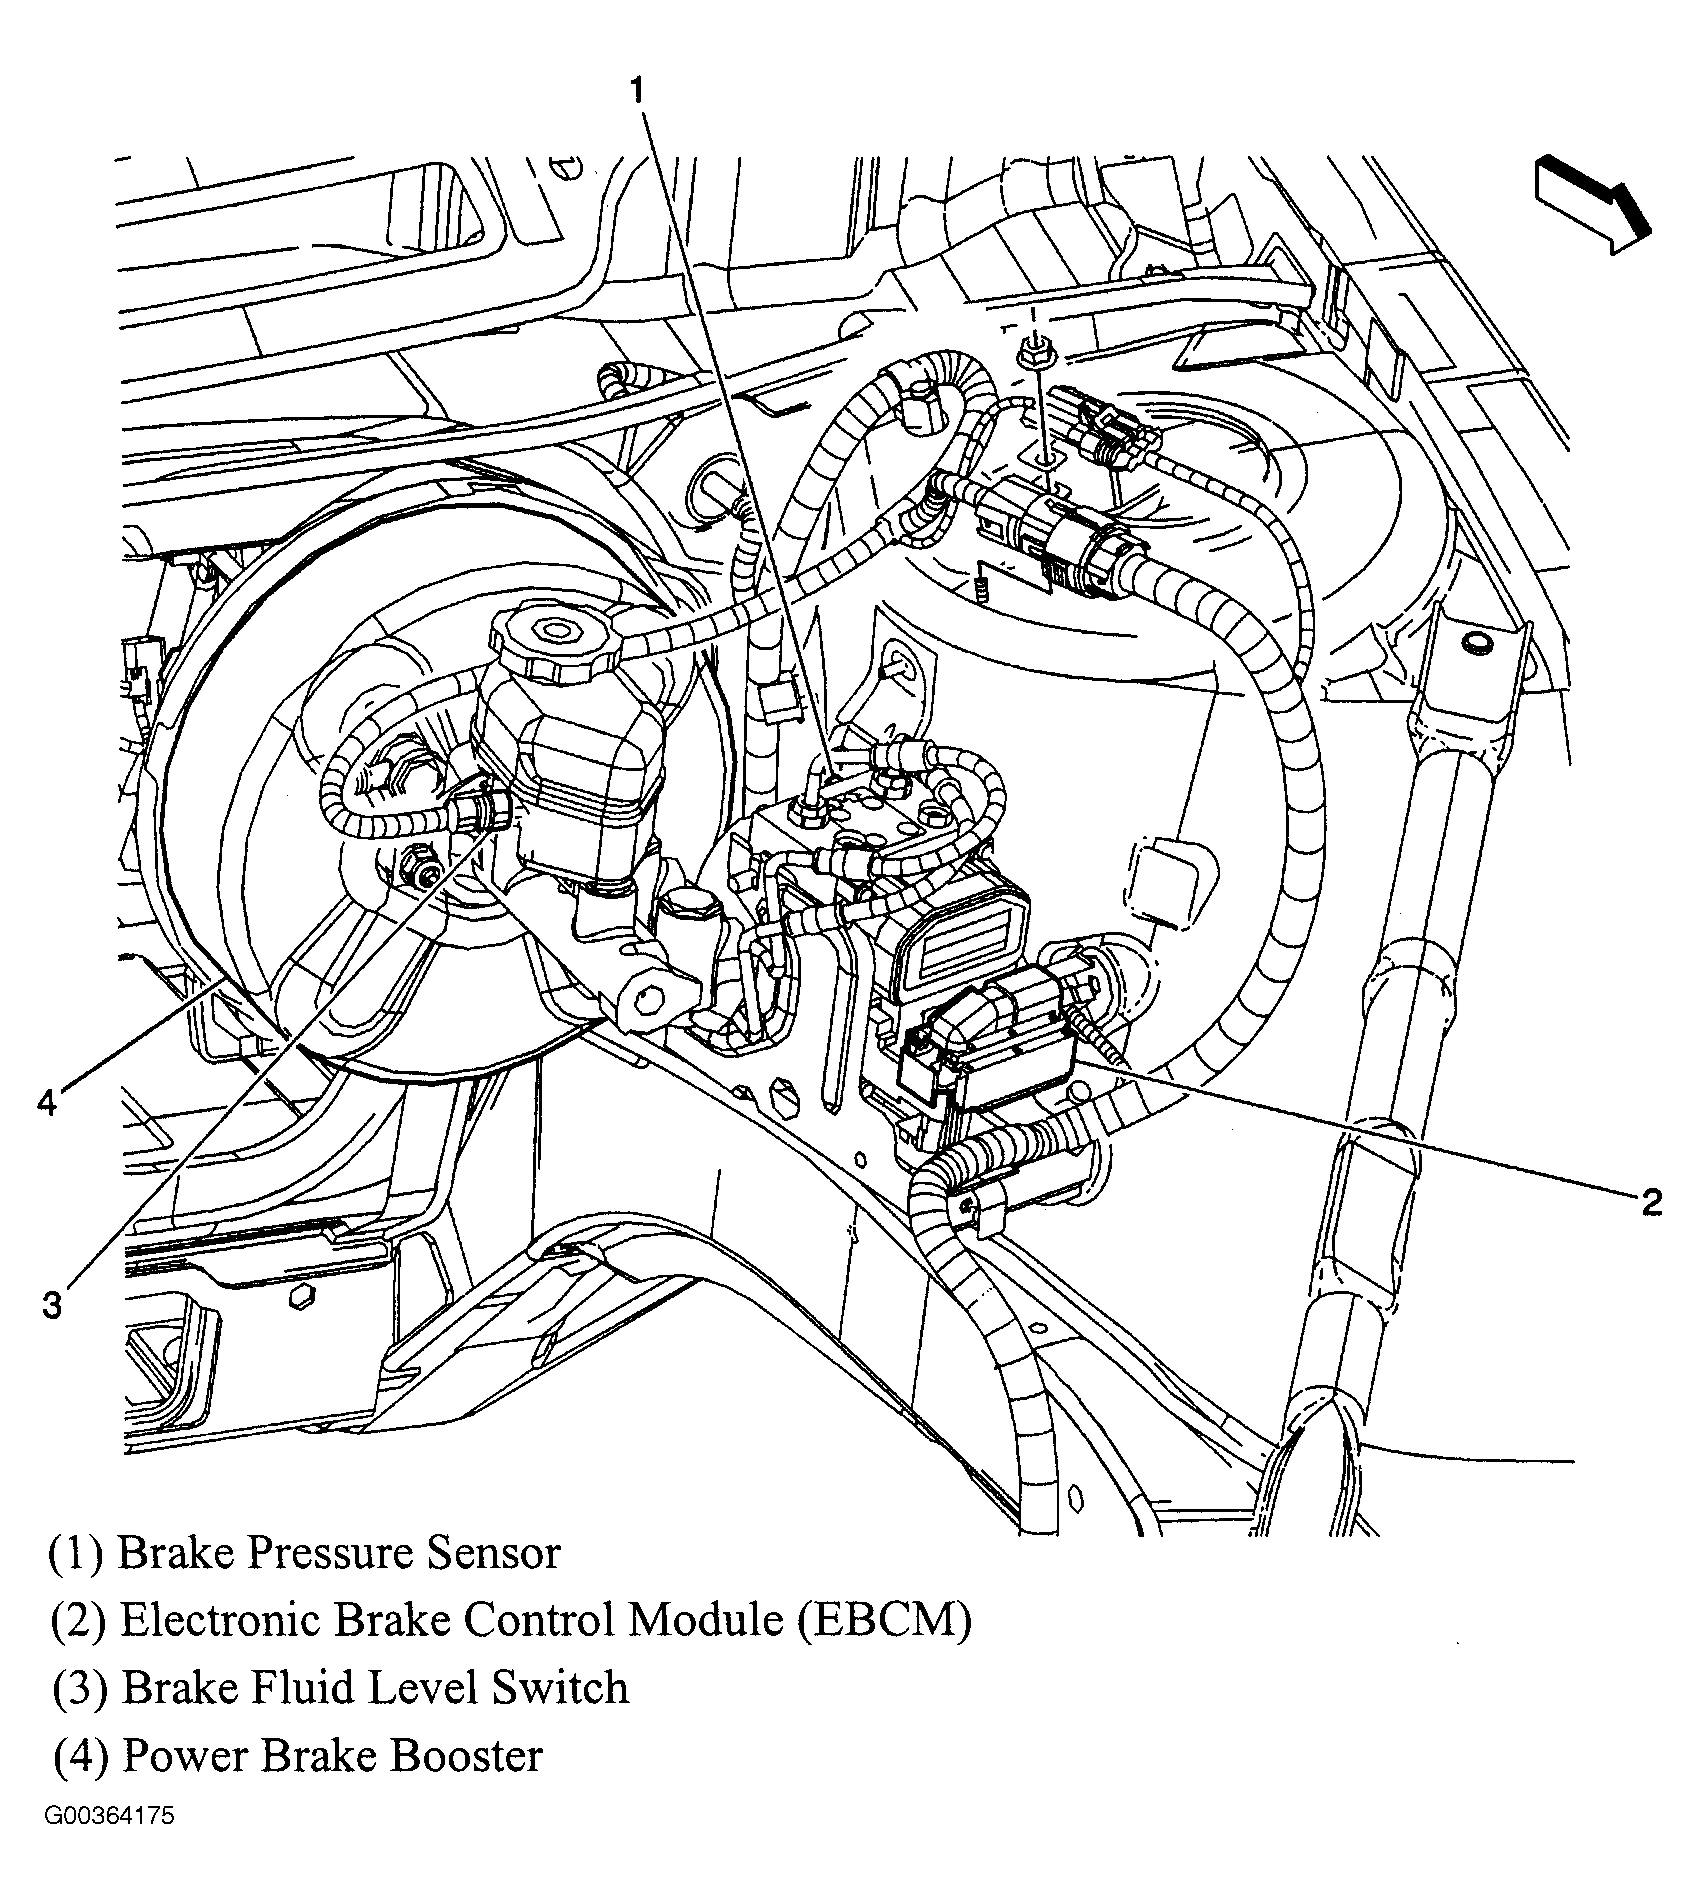 Buick LaCrosse CXL 2008 - Component Locations -  Left Rear Of Engine Compartment